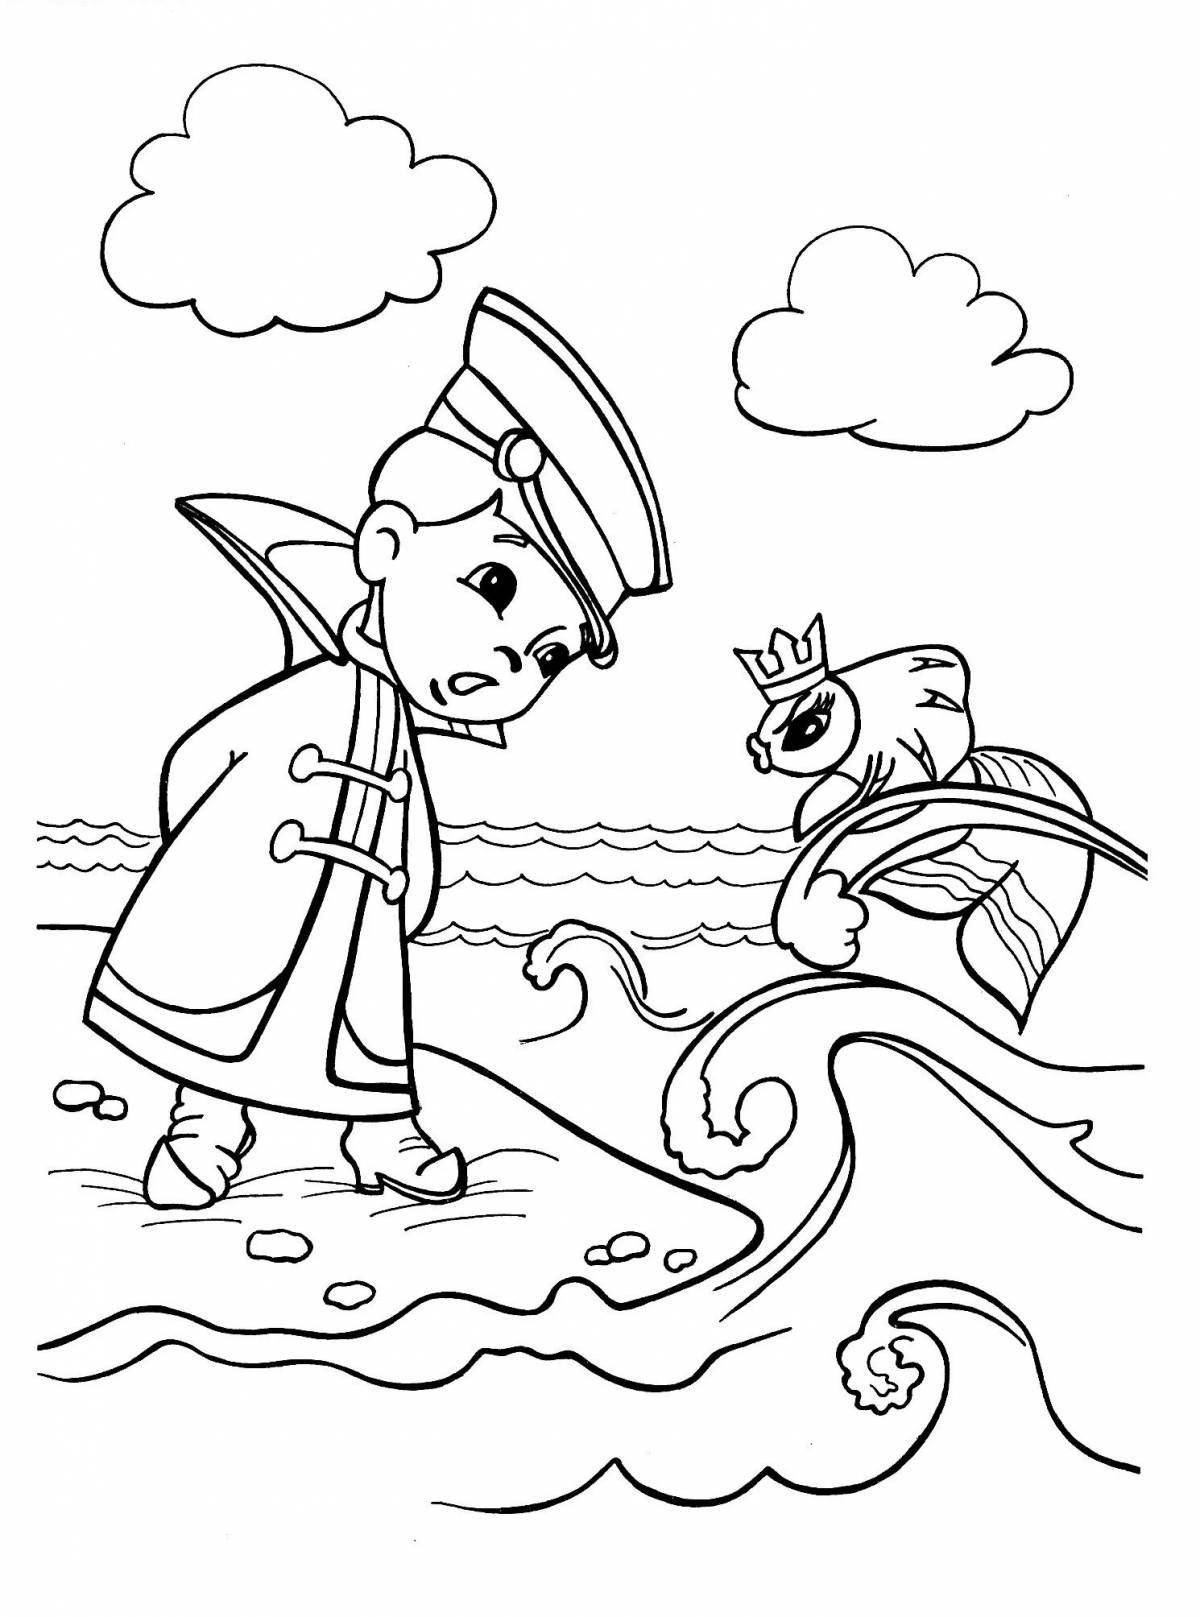 Adorable Goldfish Coloring Page